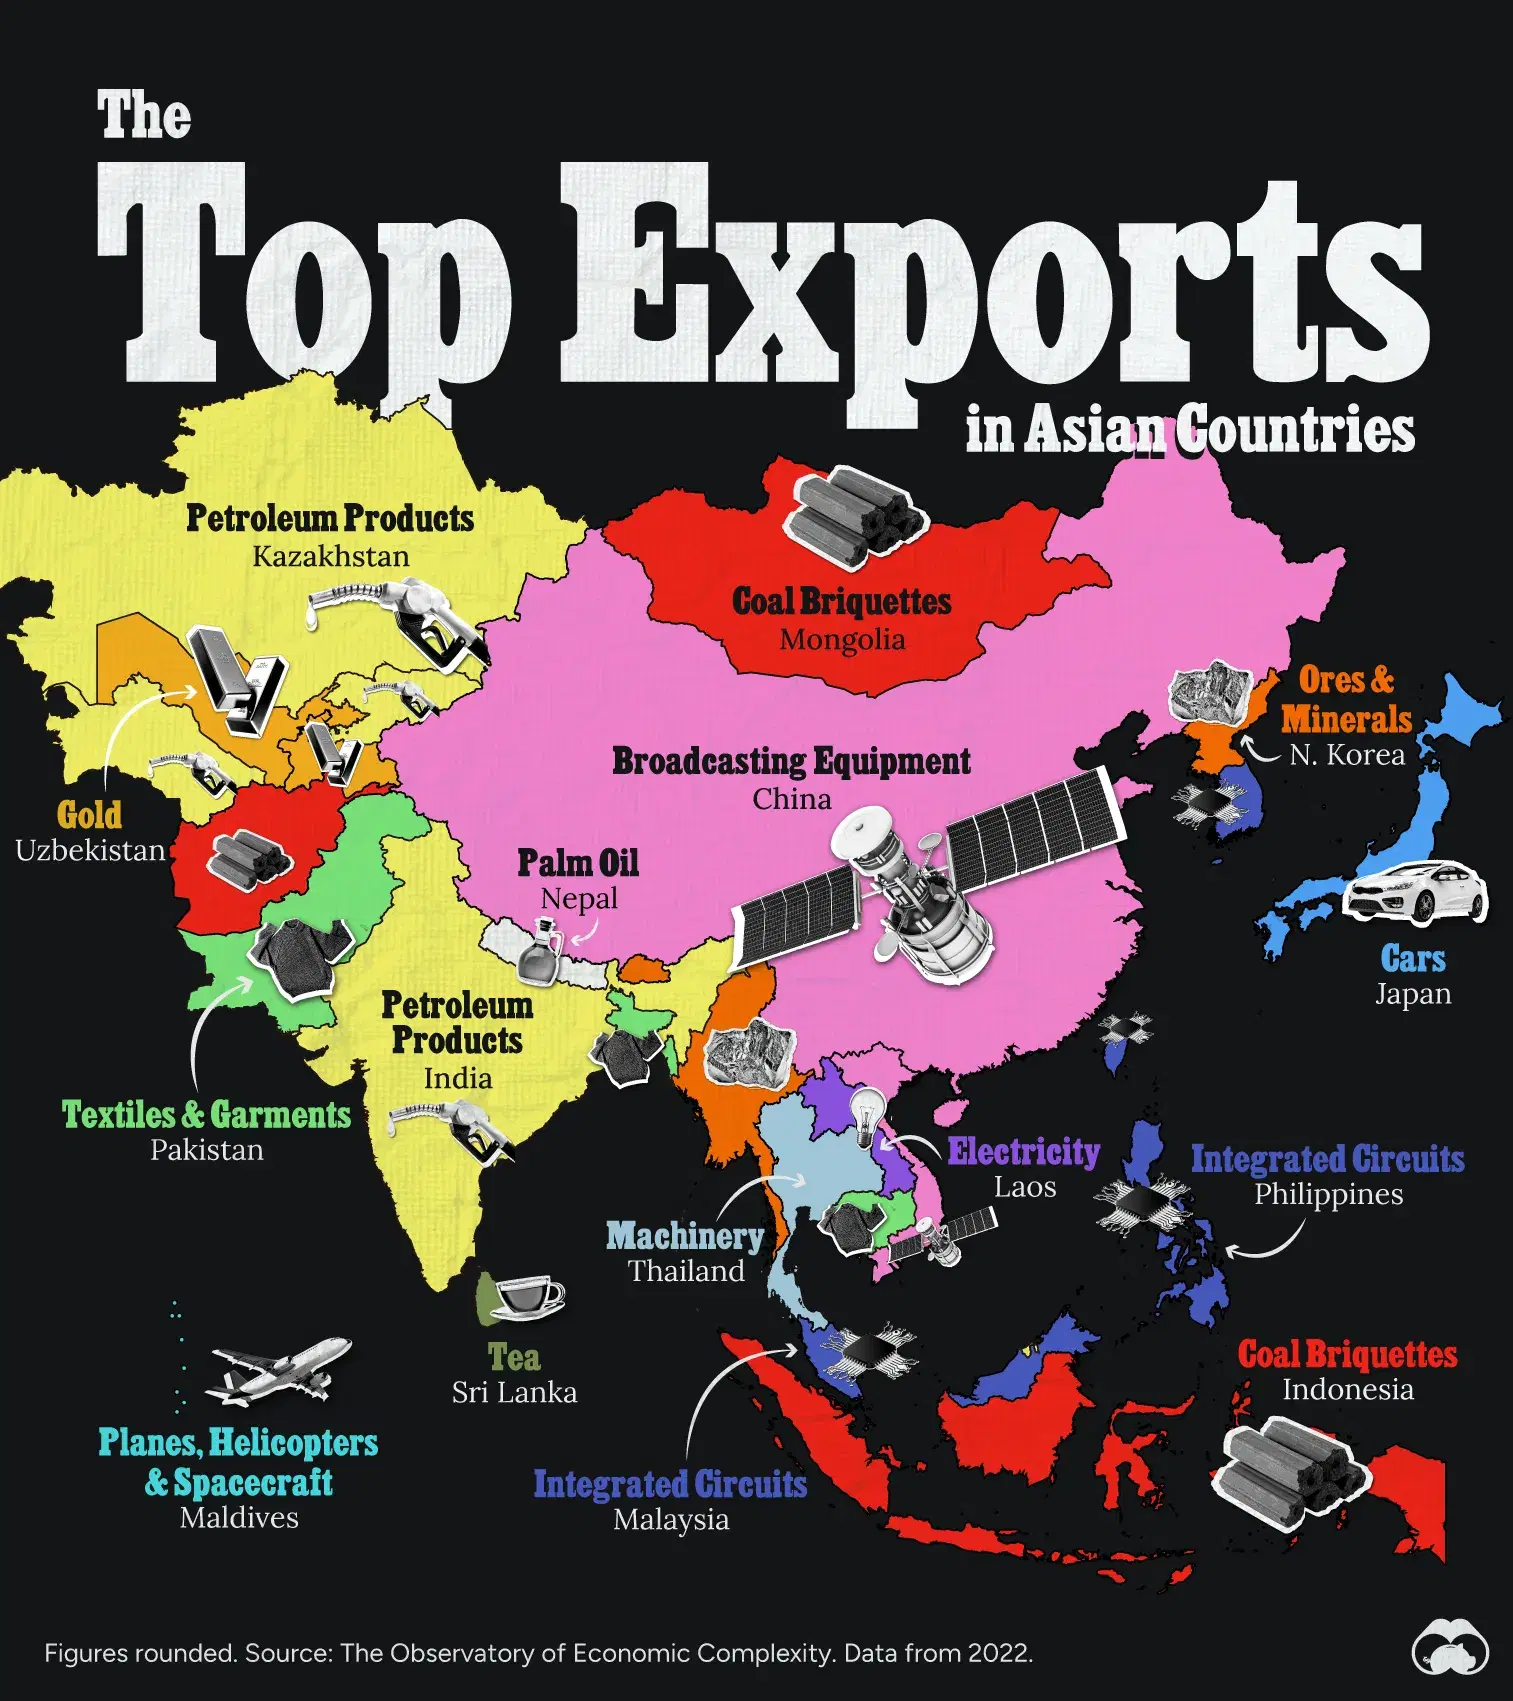 Petroleum and Integrated Circuits are the Most Common Exports from Asia